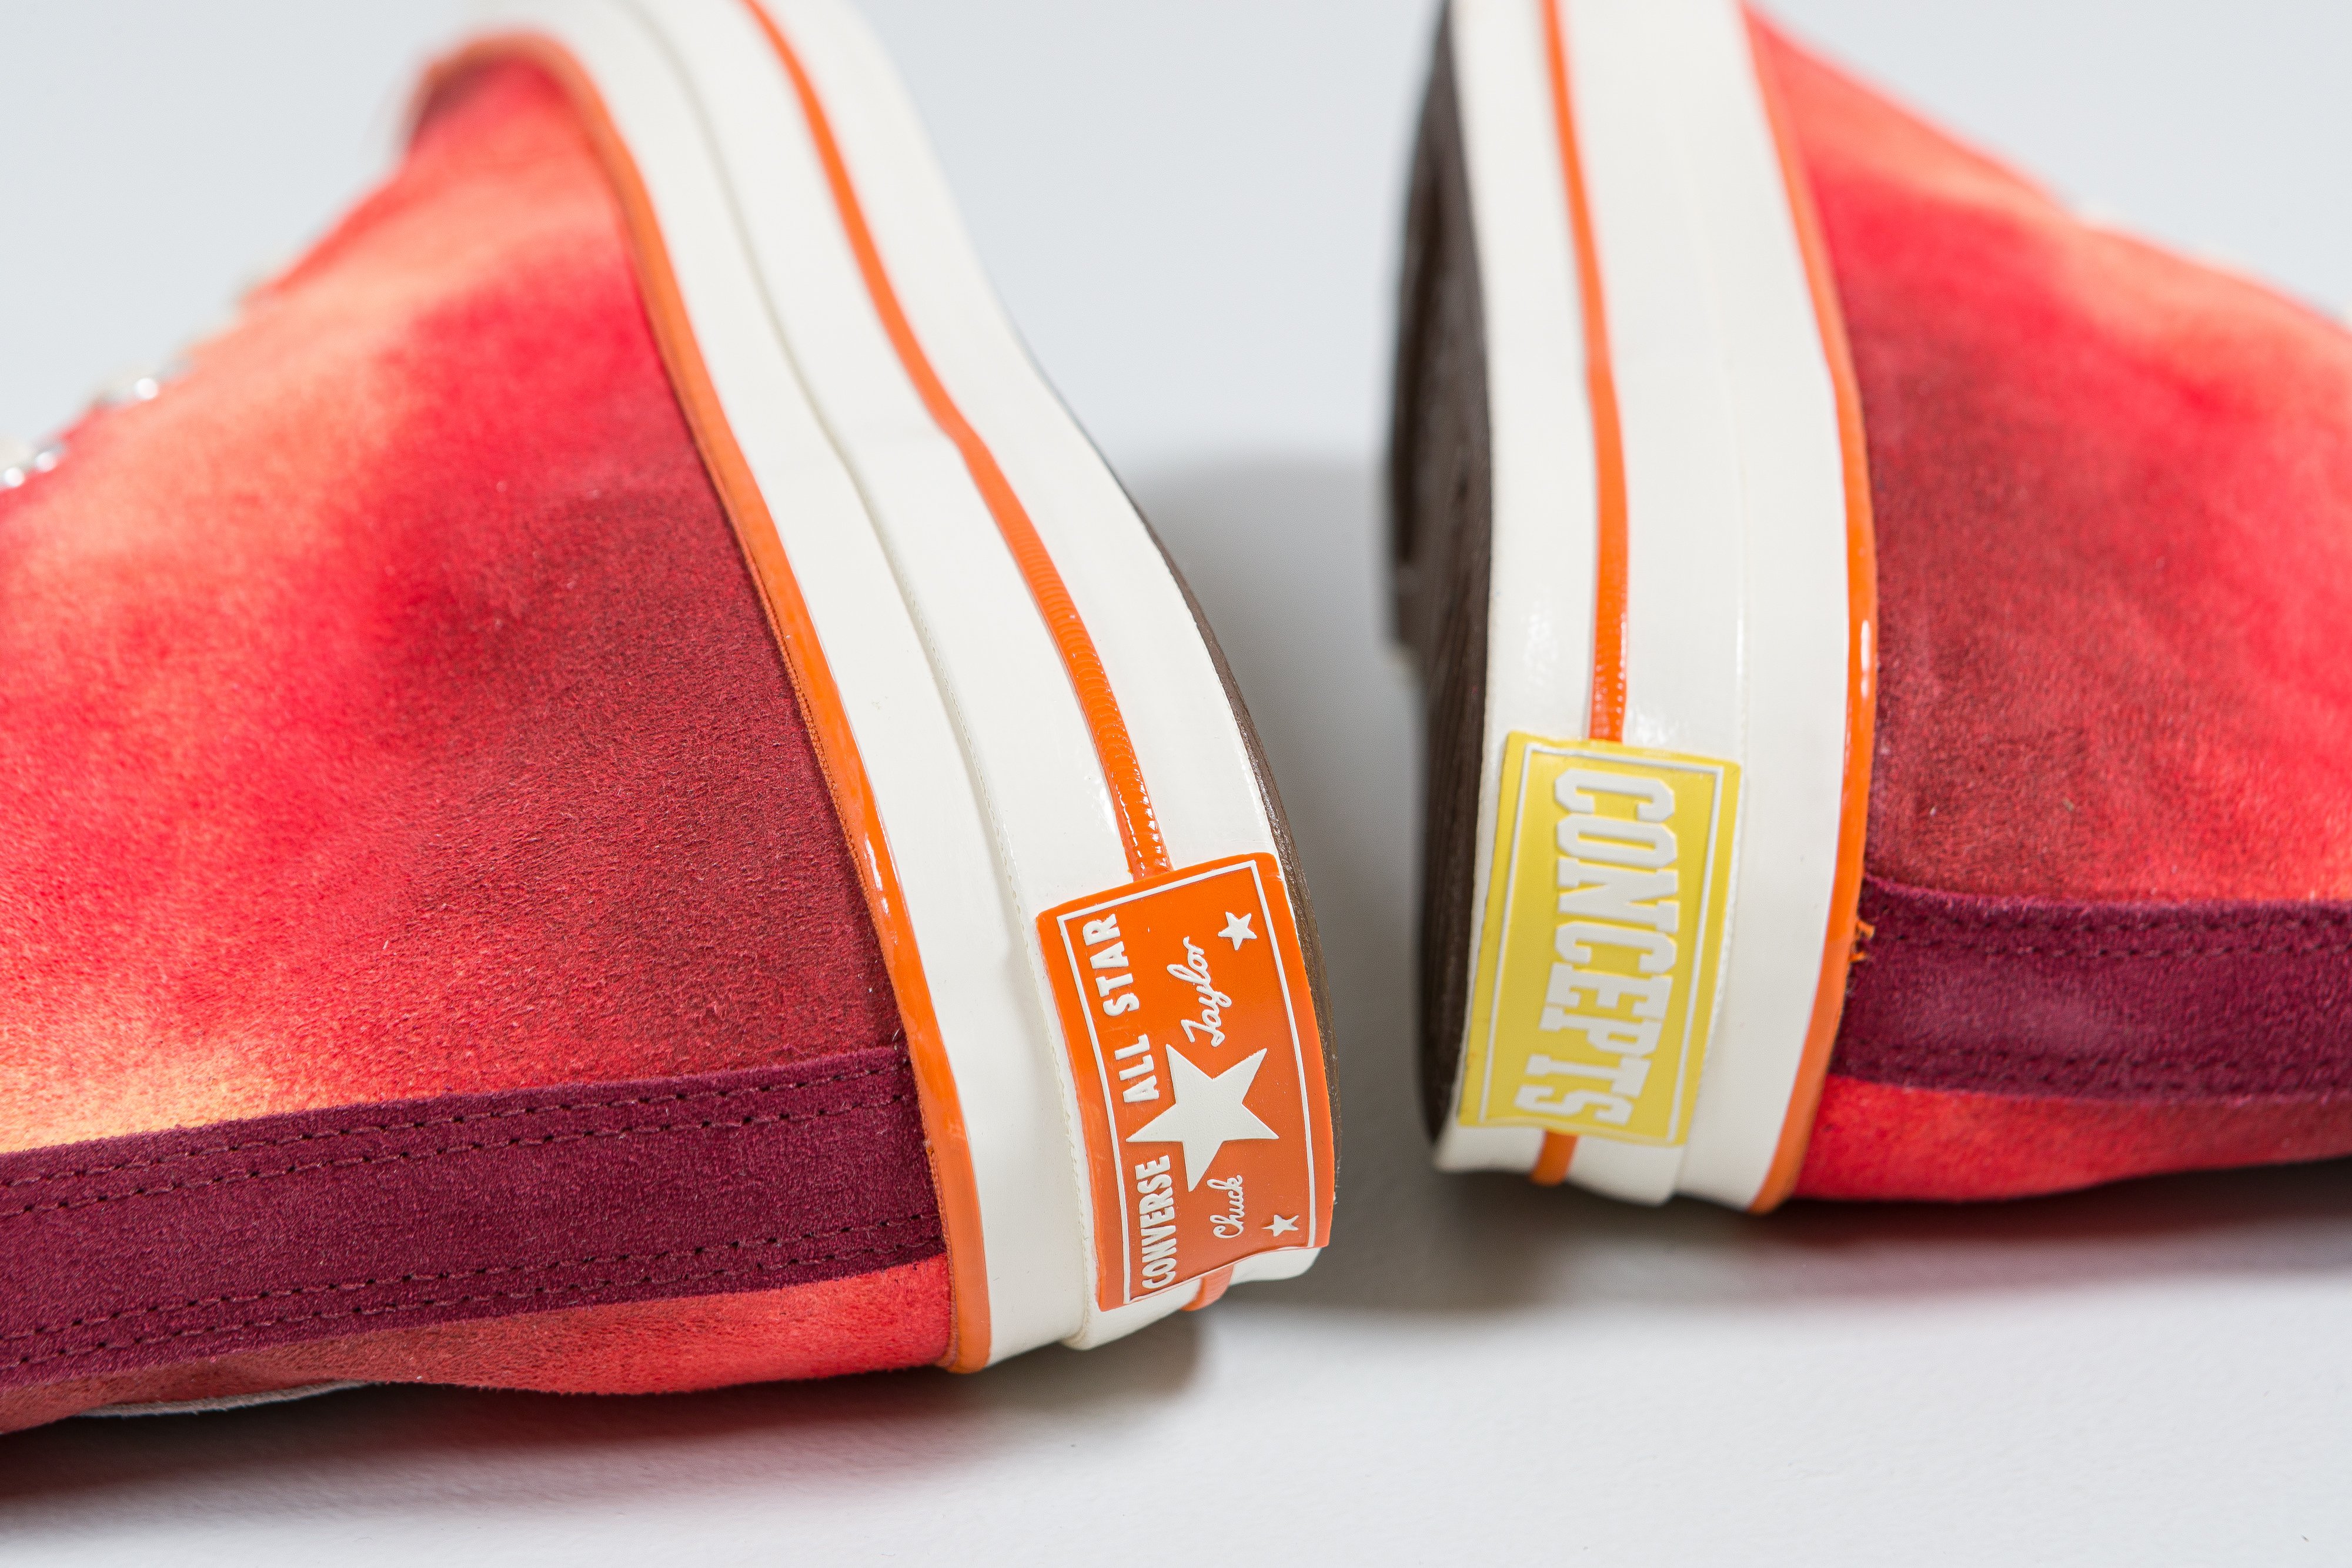 Up There - Converse X Concepts 1970's Chuck Taylor 'Peach Basket'